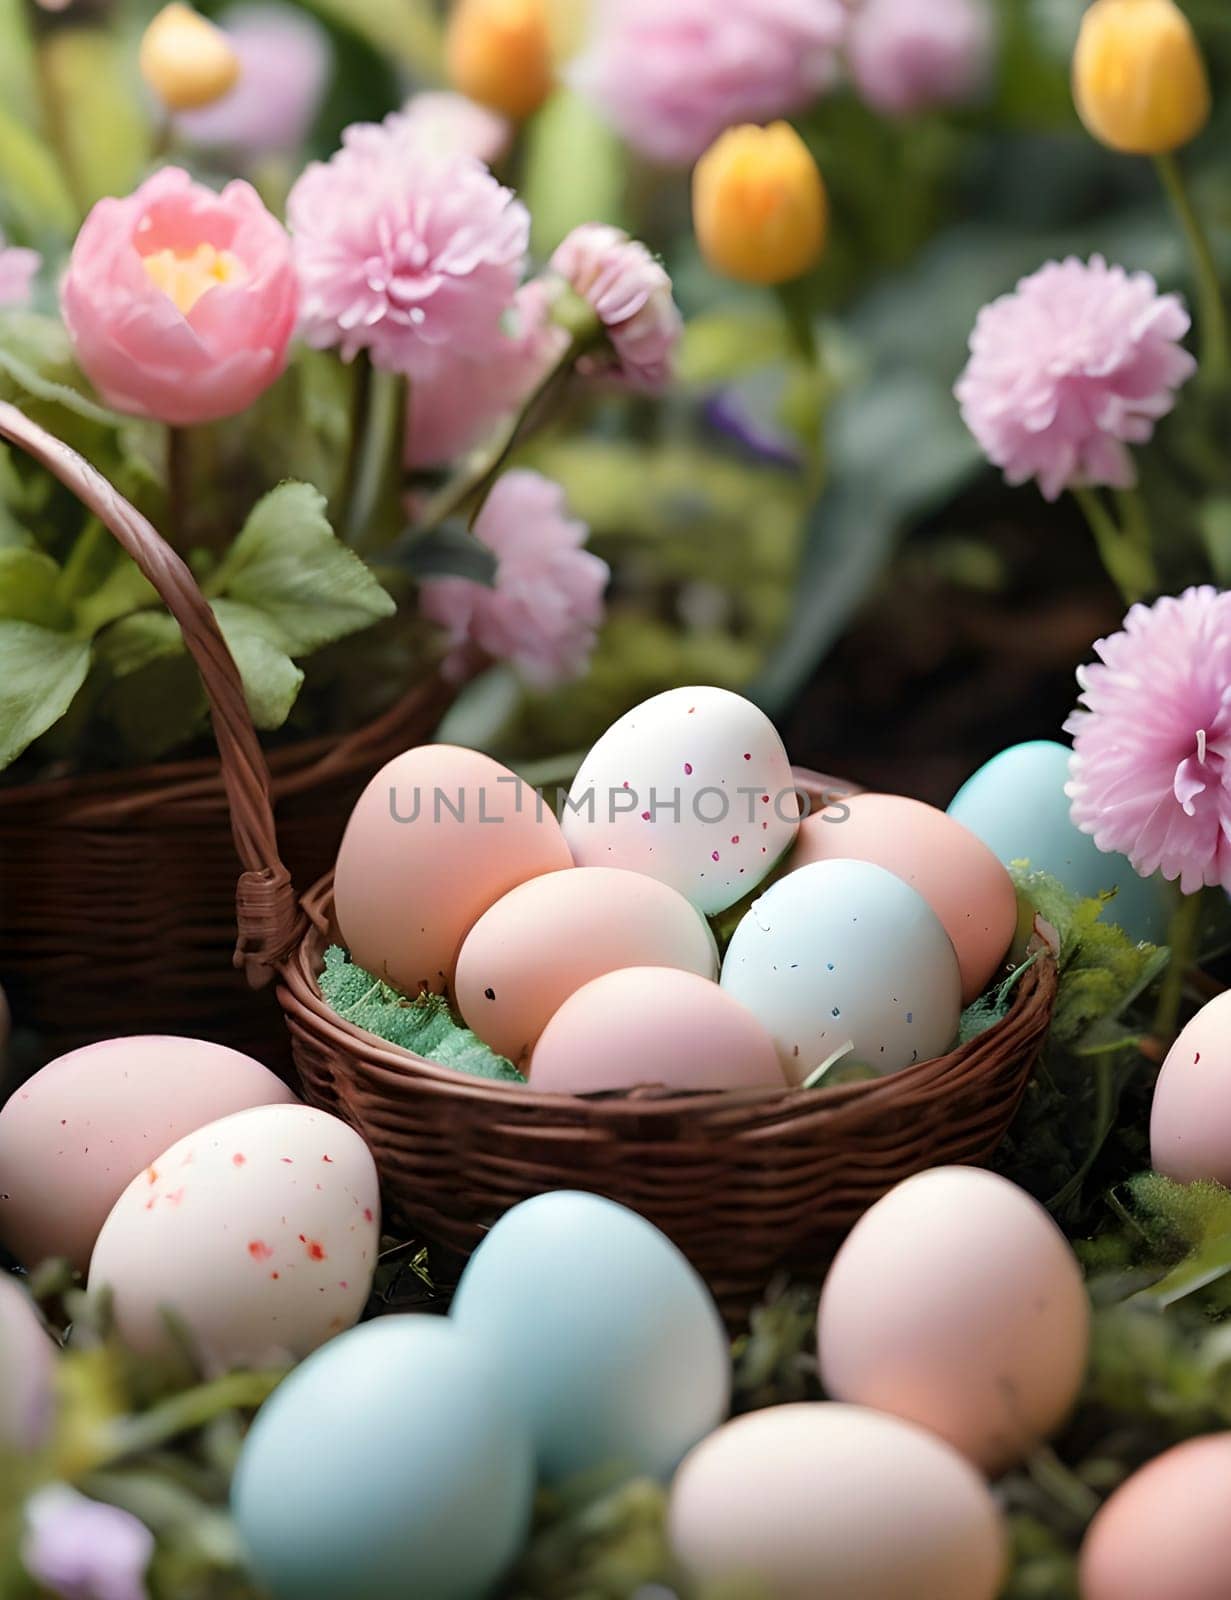 A Pastel Easter Egg Hunt Amidst the Vibrant Garden Blooms